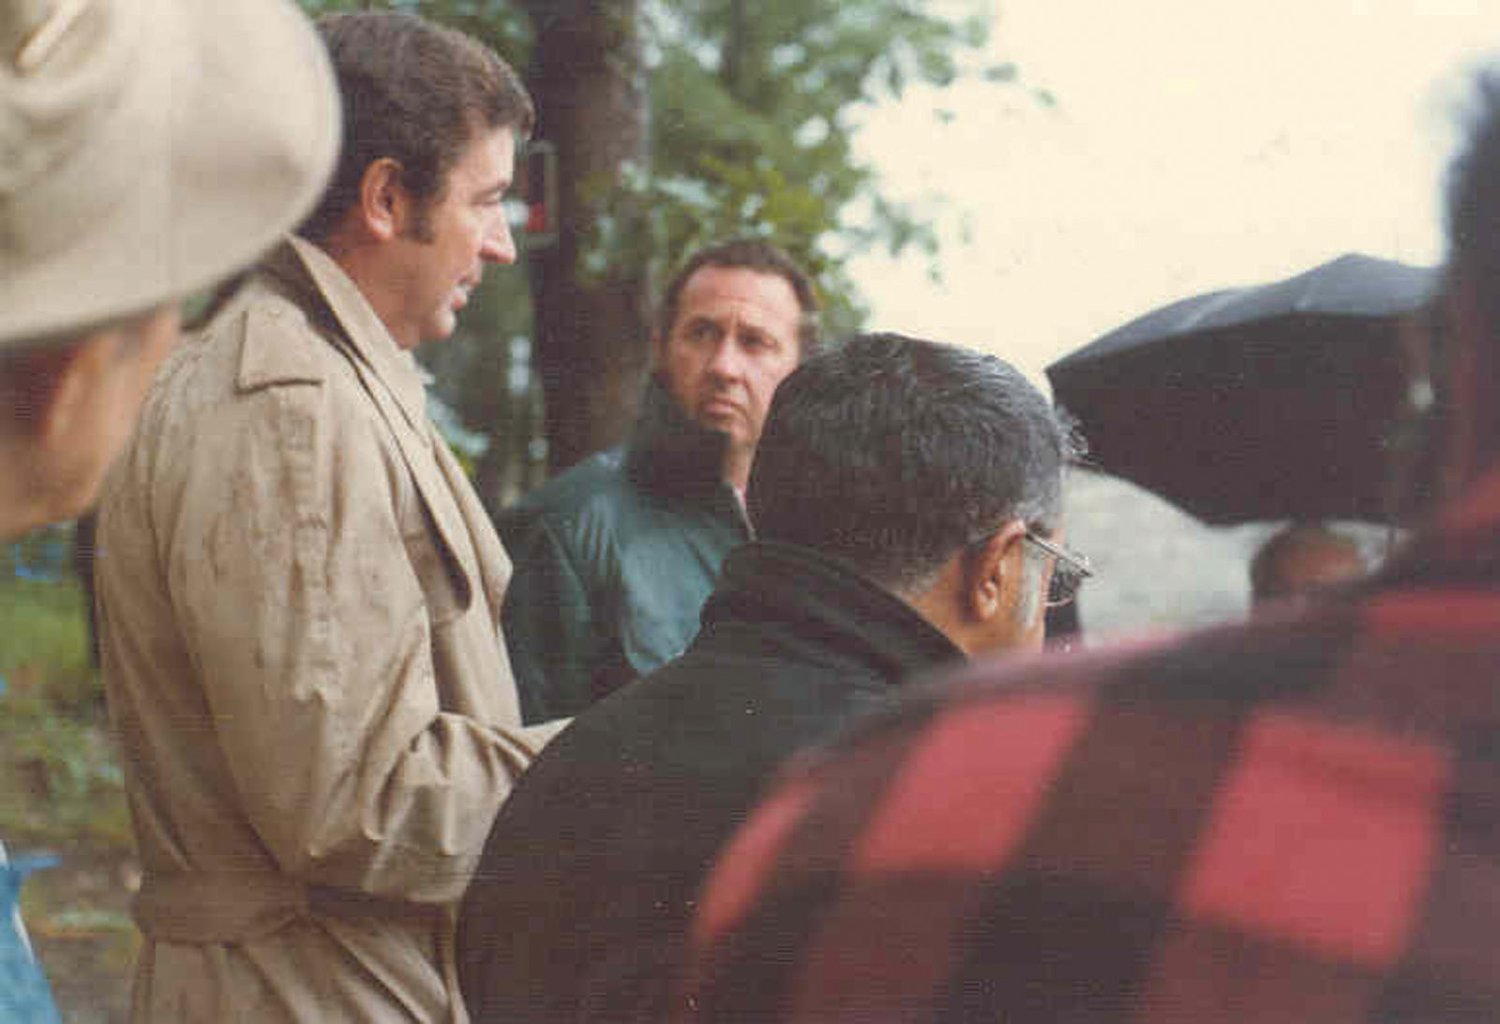 SURVEYING THE SITE: Former mayor Eugene McCaffrey, left, and former director of public works Robert Knox visited the landfill in 1975 in response to the complaints of neighbors. The landfill continued operating for another two years before being bought and closed down by the state.